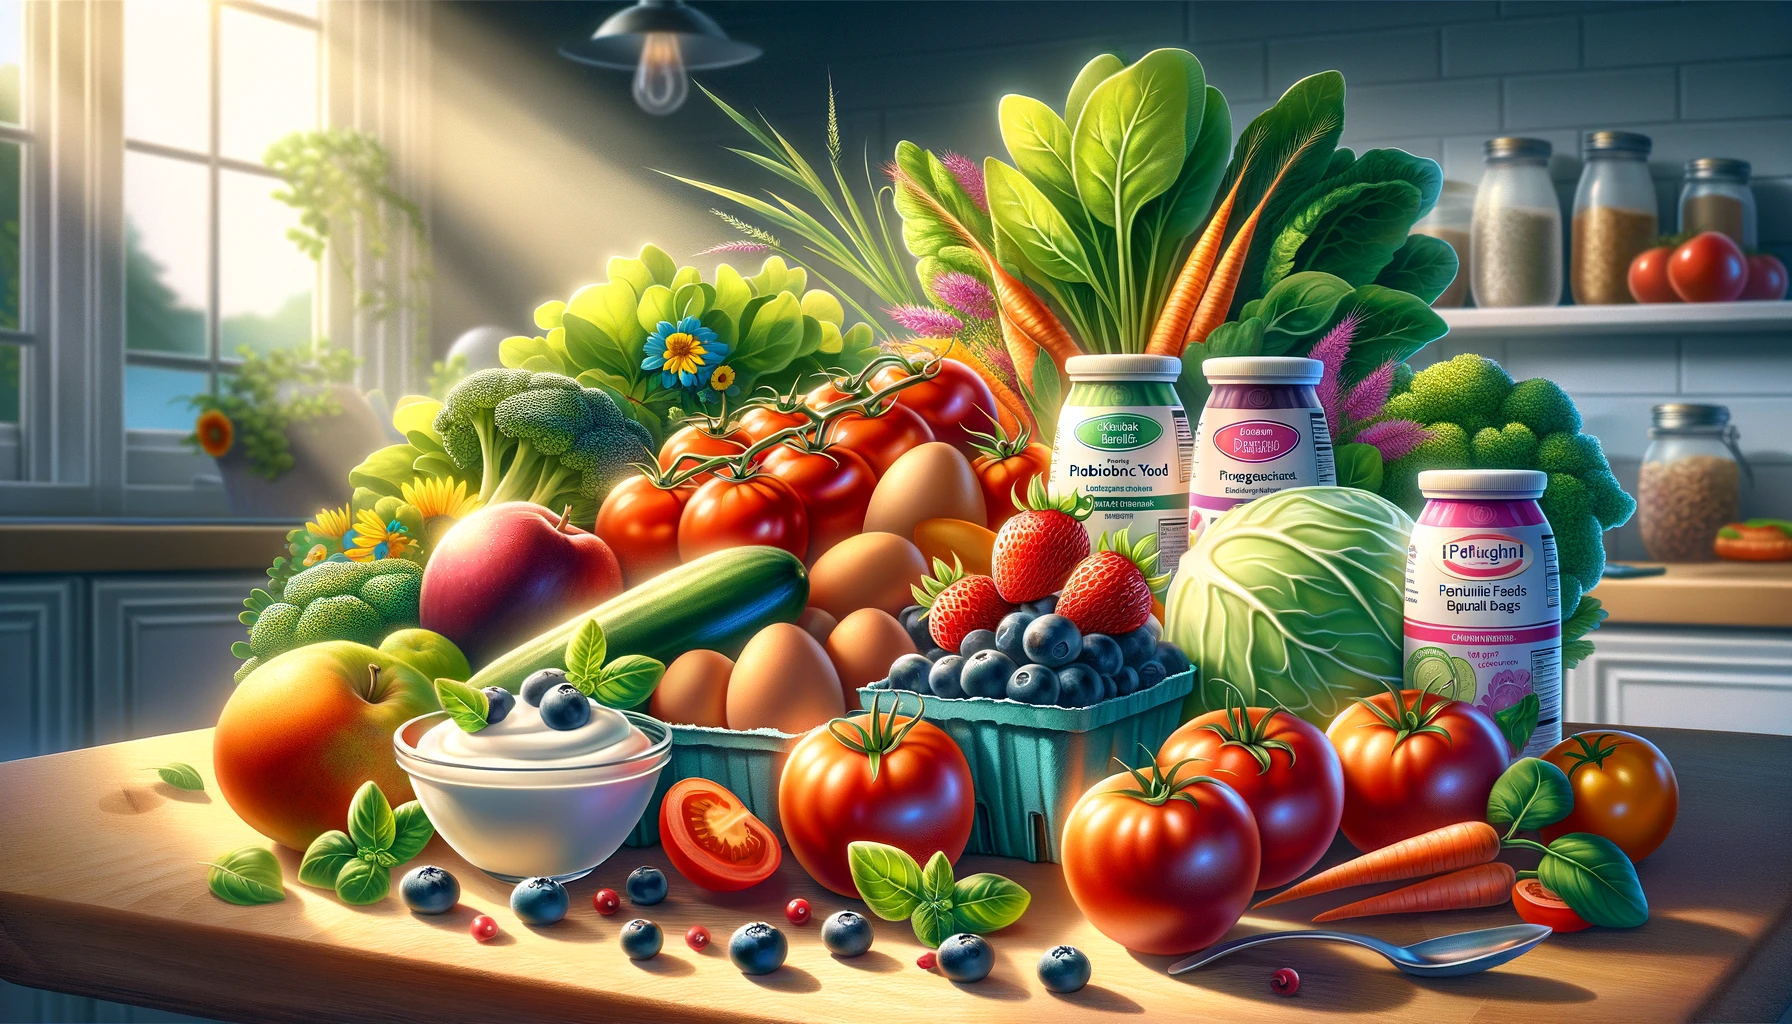 Assorted colorful fruits and vegetables, including tomatoes and berries, alongside functional foods such as probiotic yogurt and omega-3 enriched eggs, each labeled with health benefits, in a bright kitchen setting.